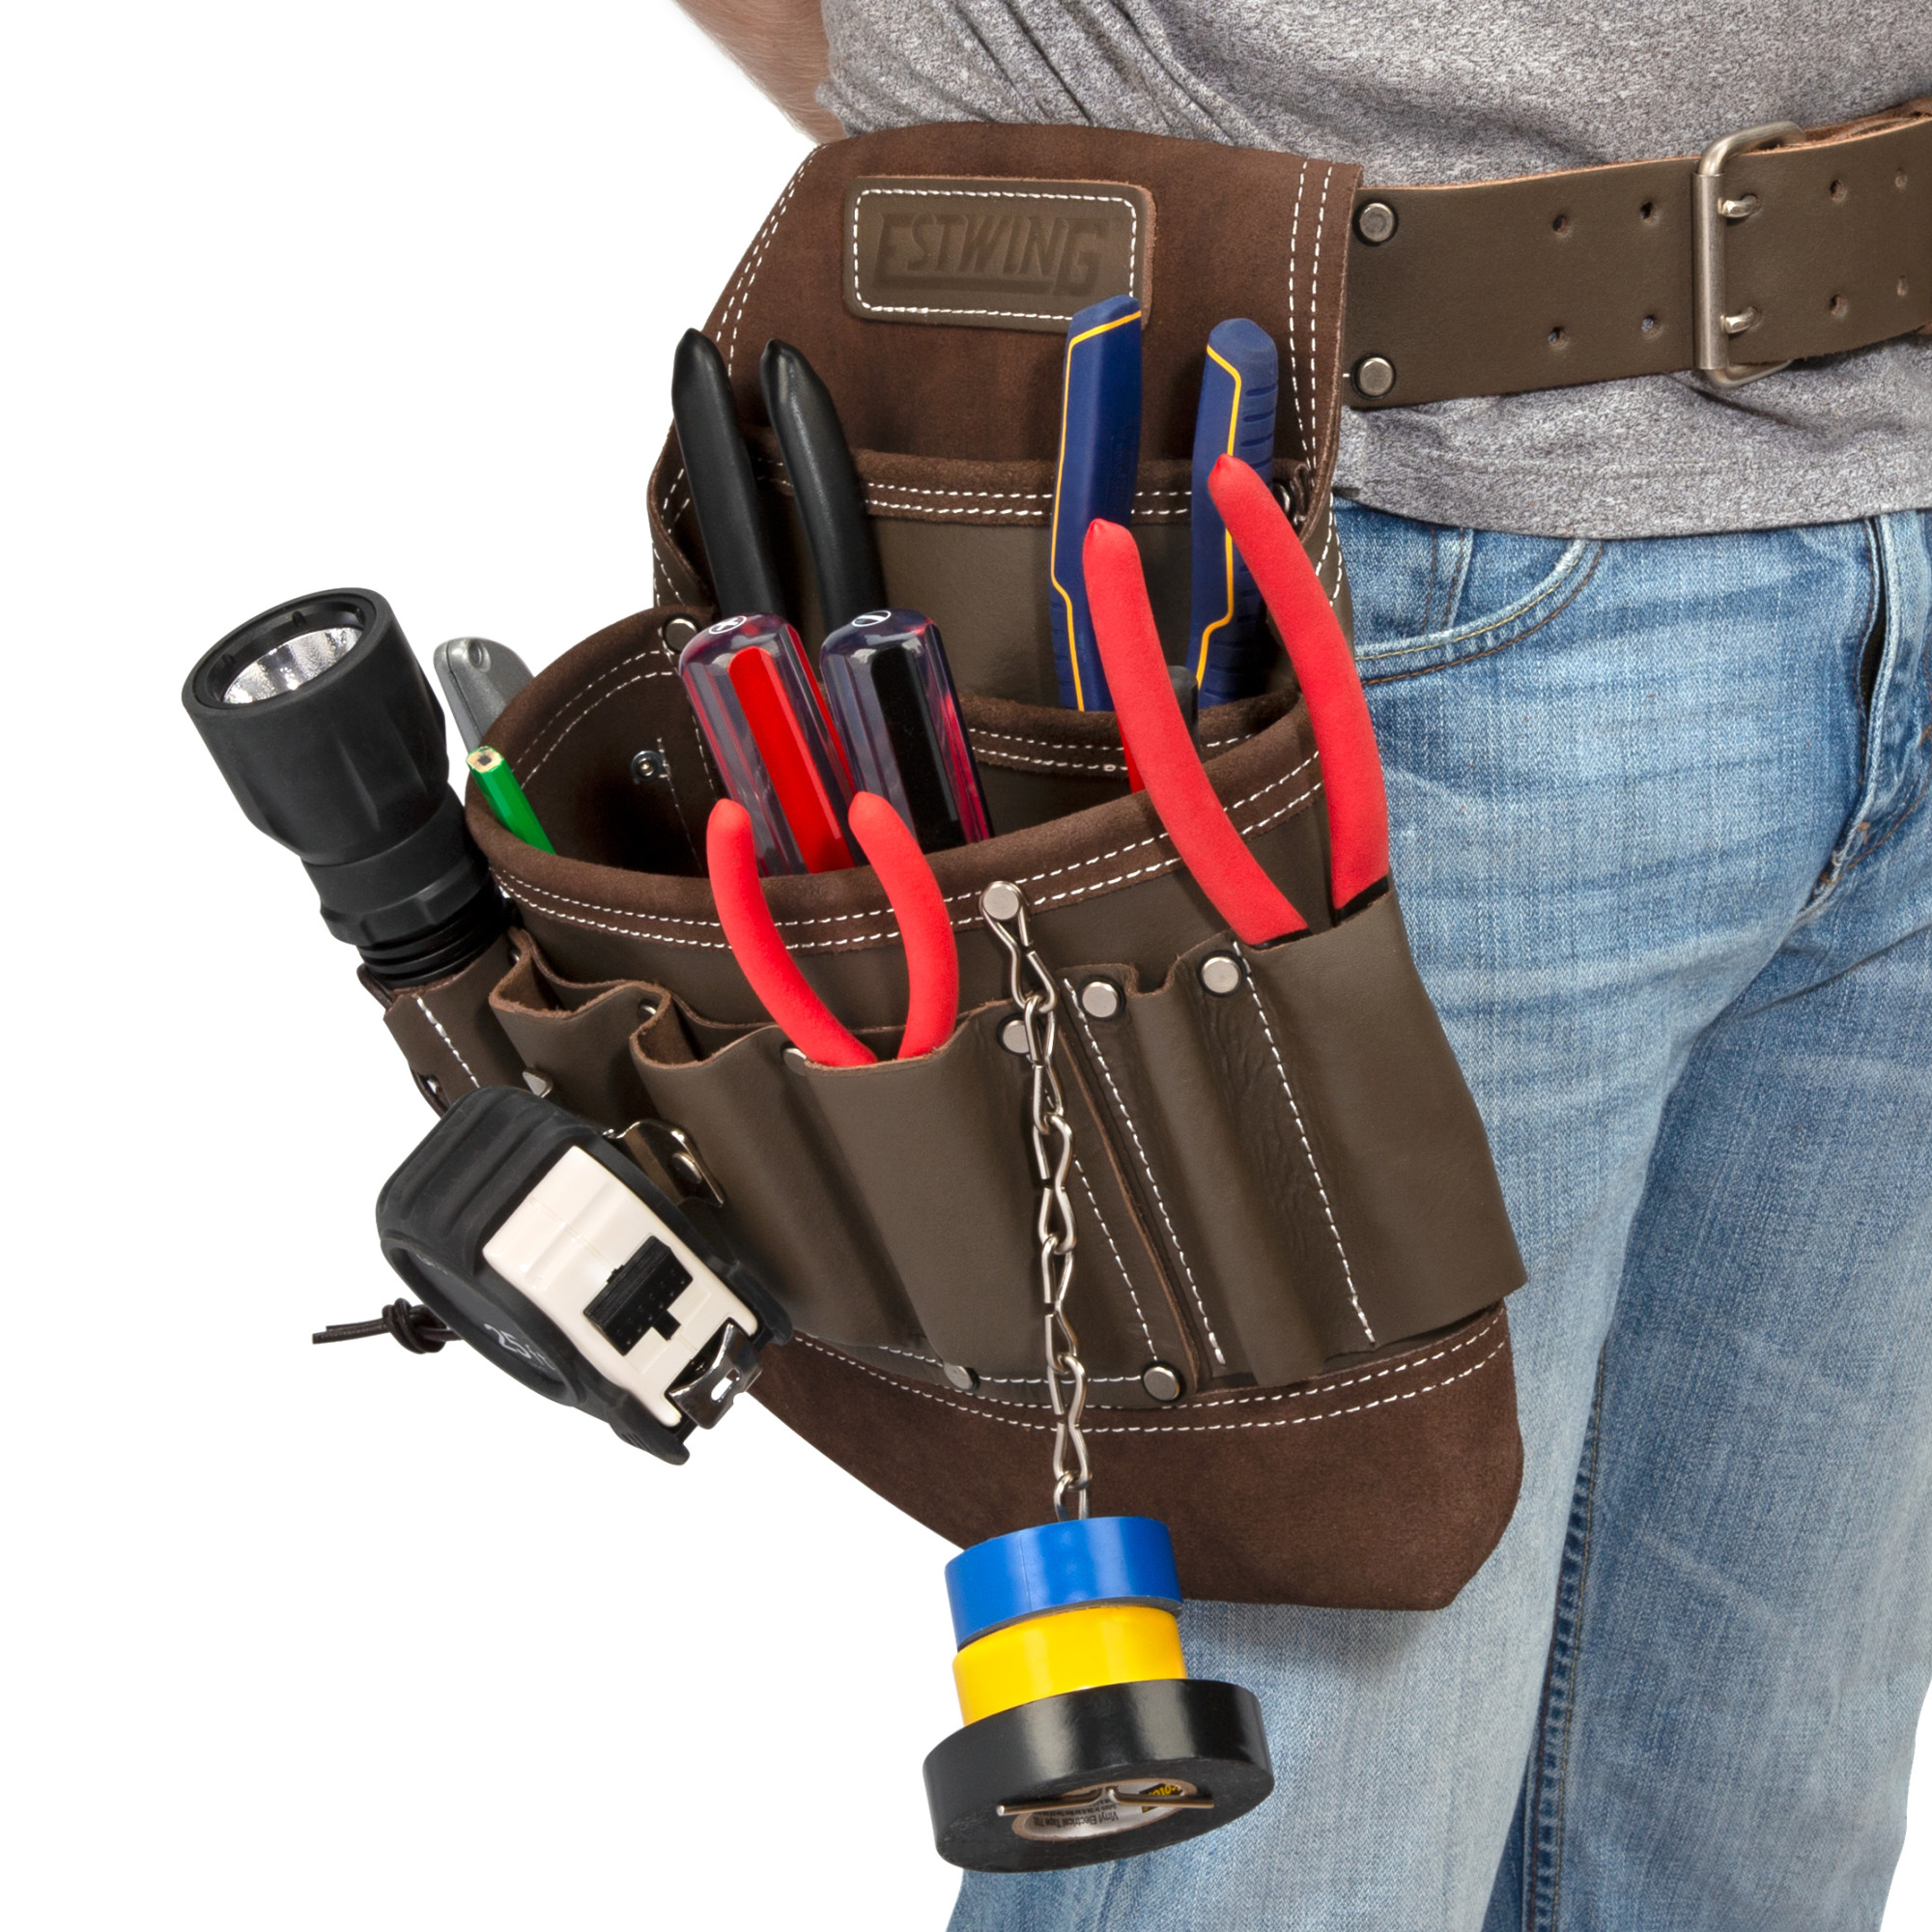 Estwing 8 Pocket Leather Electricians Tool Belt Pouch 94749 Ebay